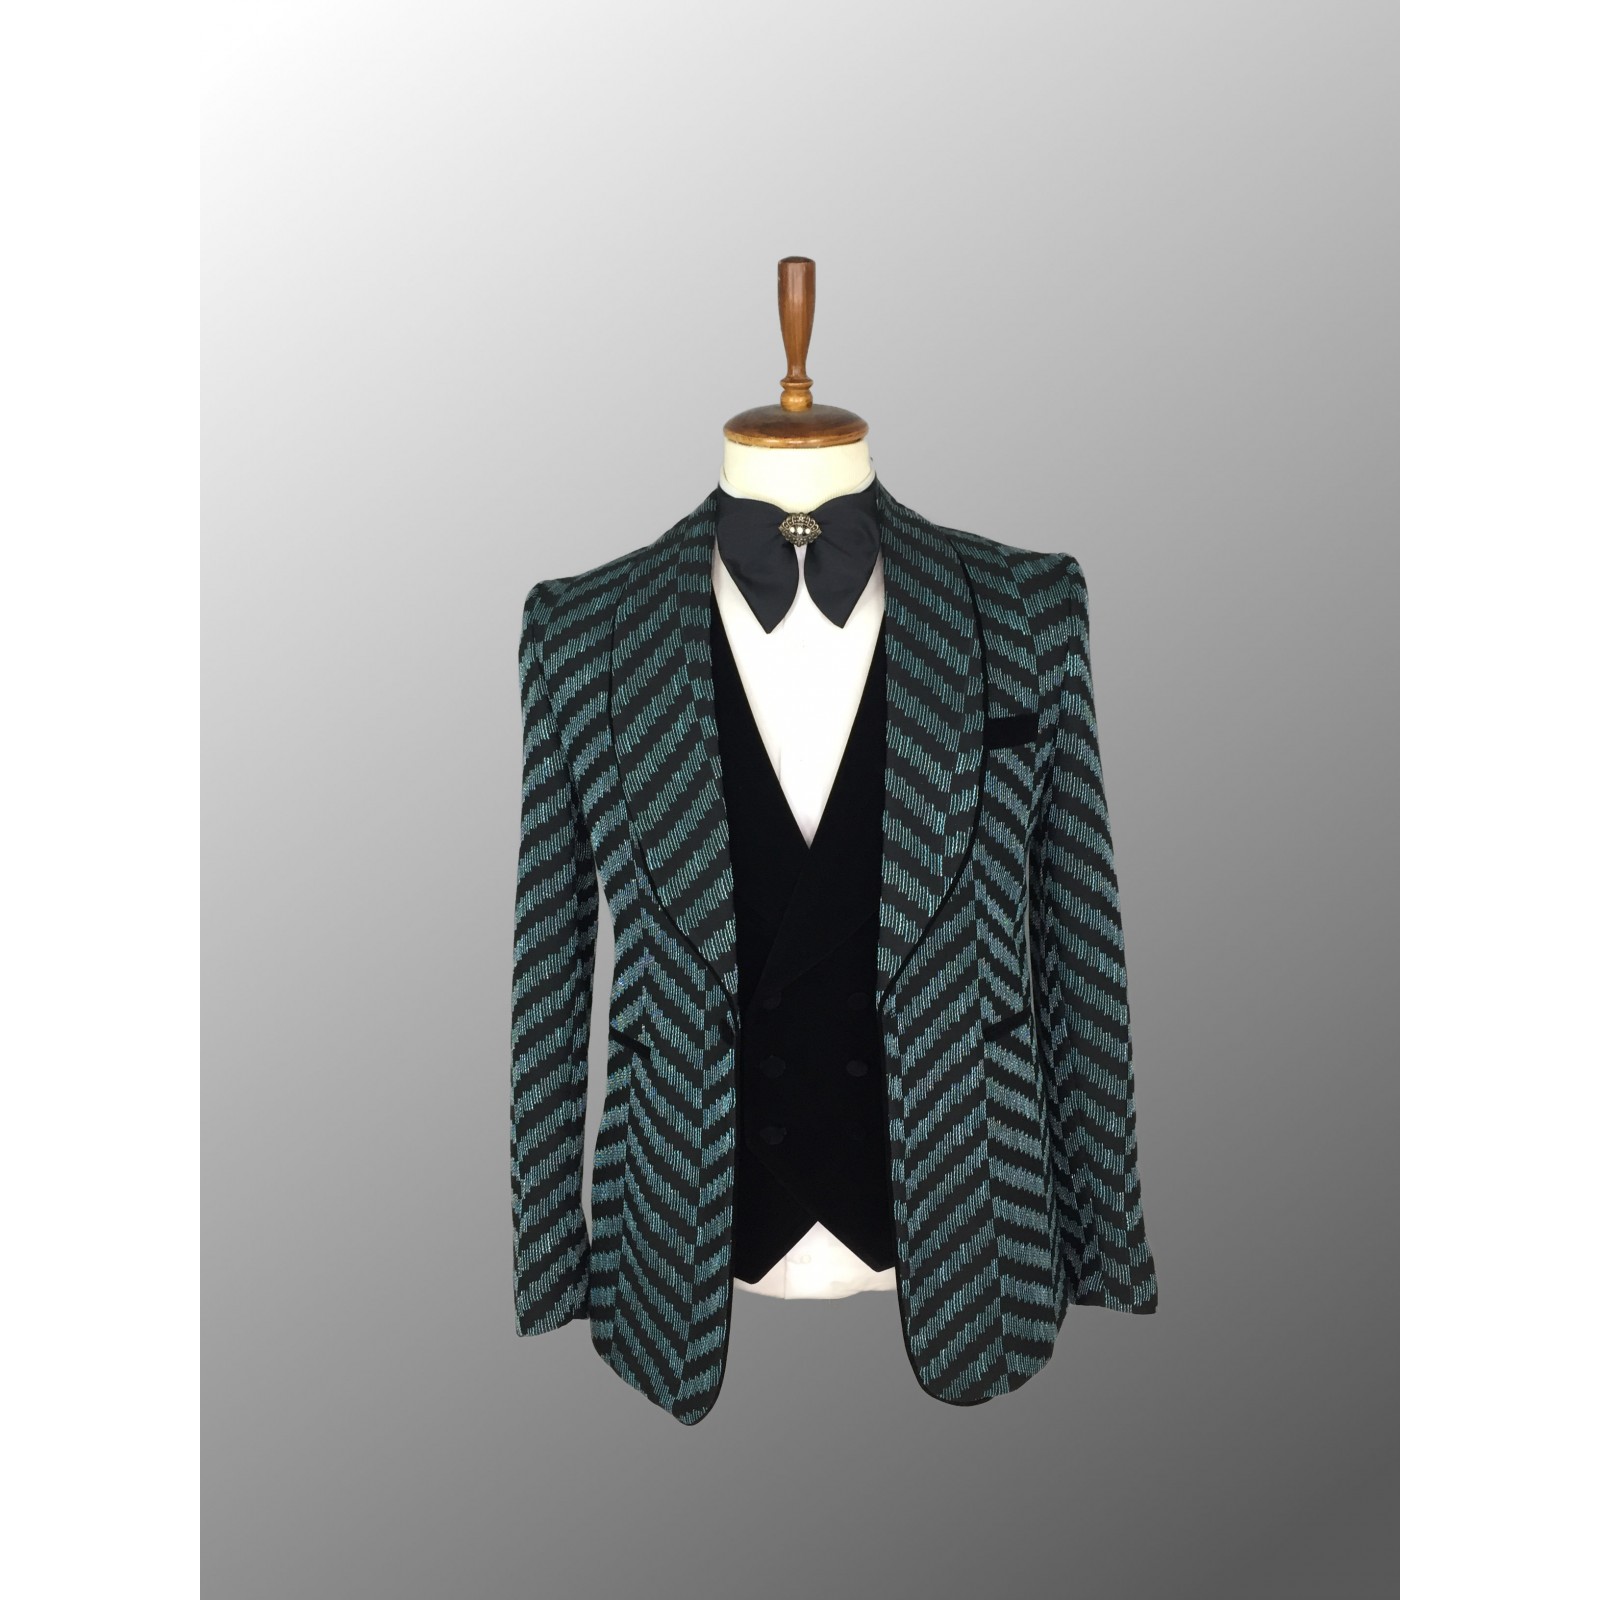 Green and Black Patterned Tuxedo